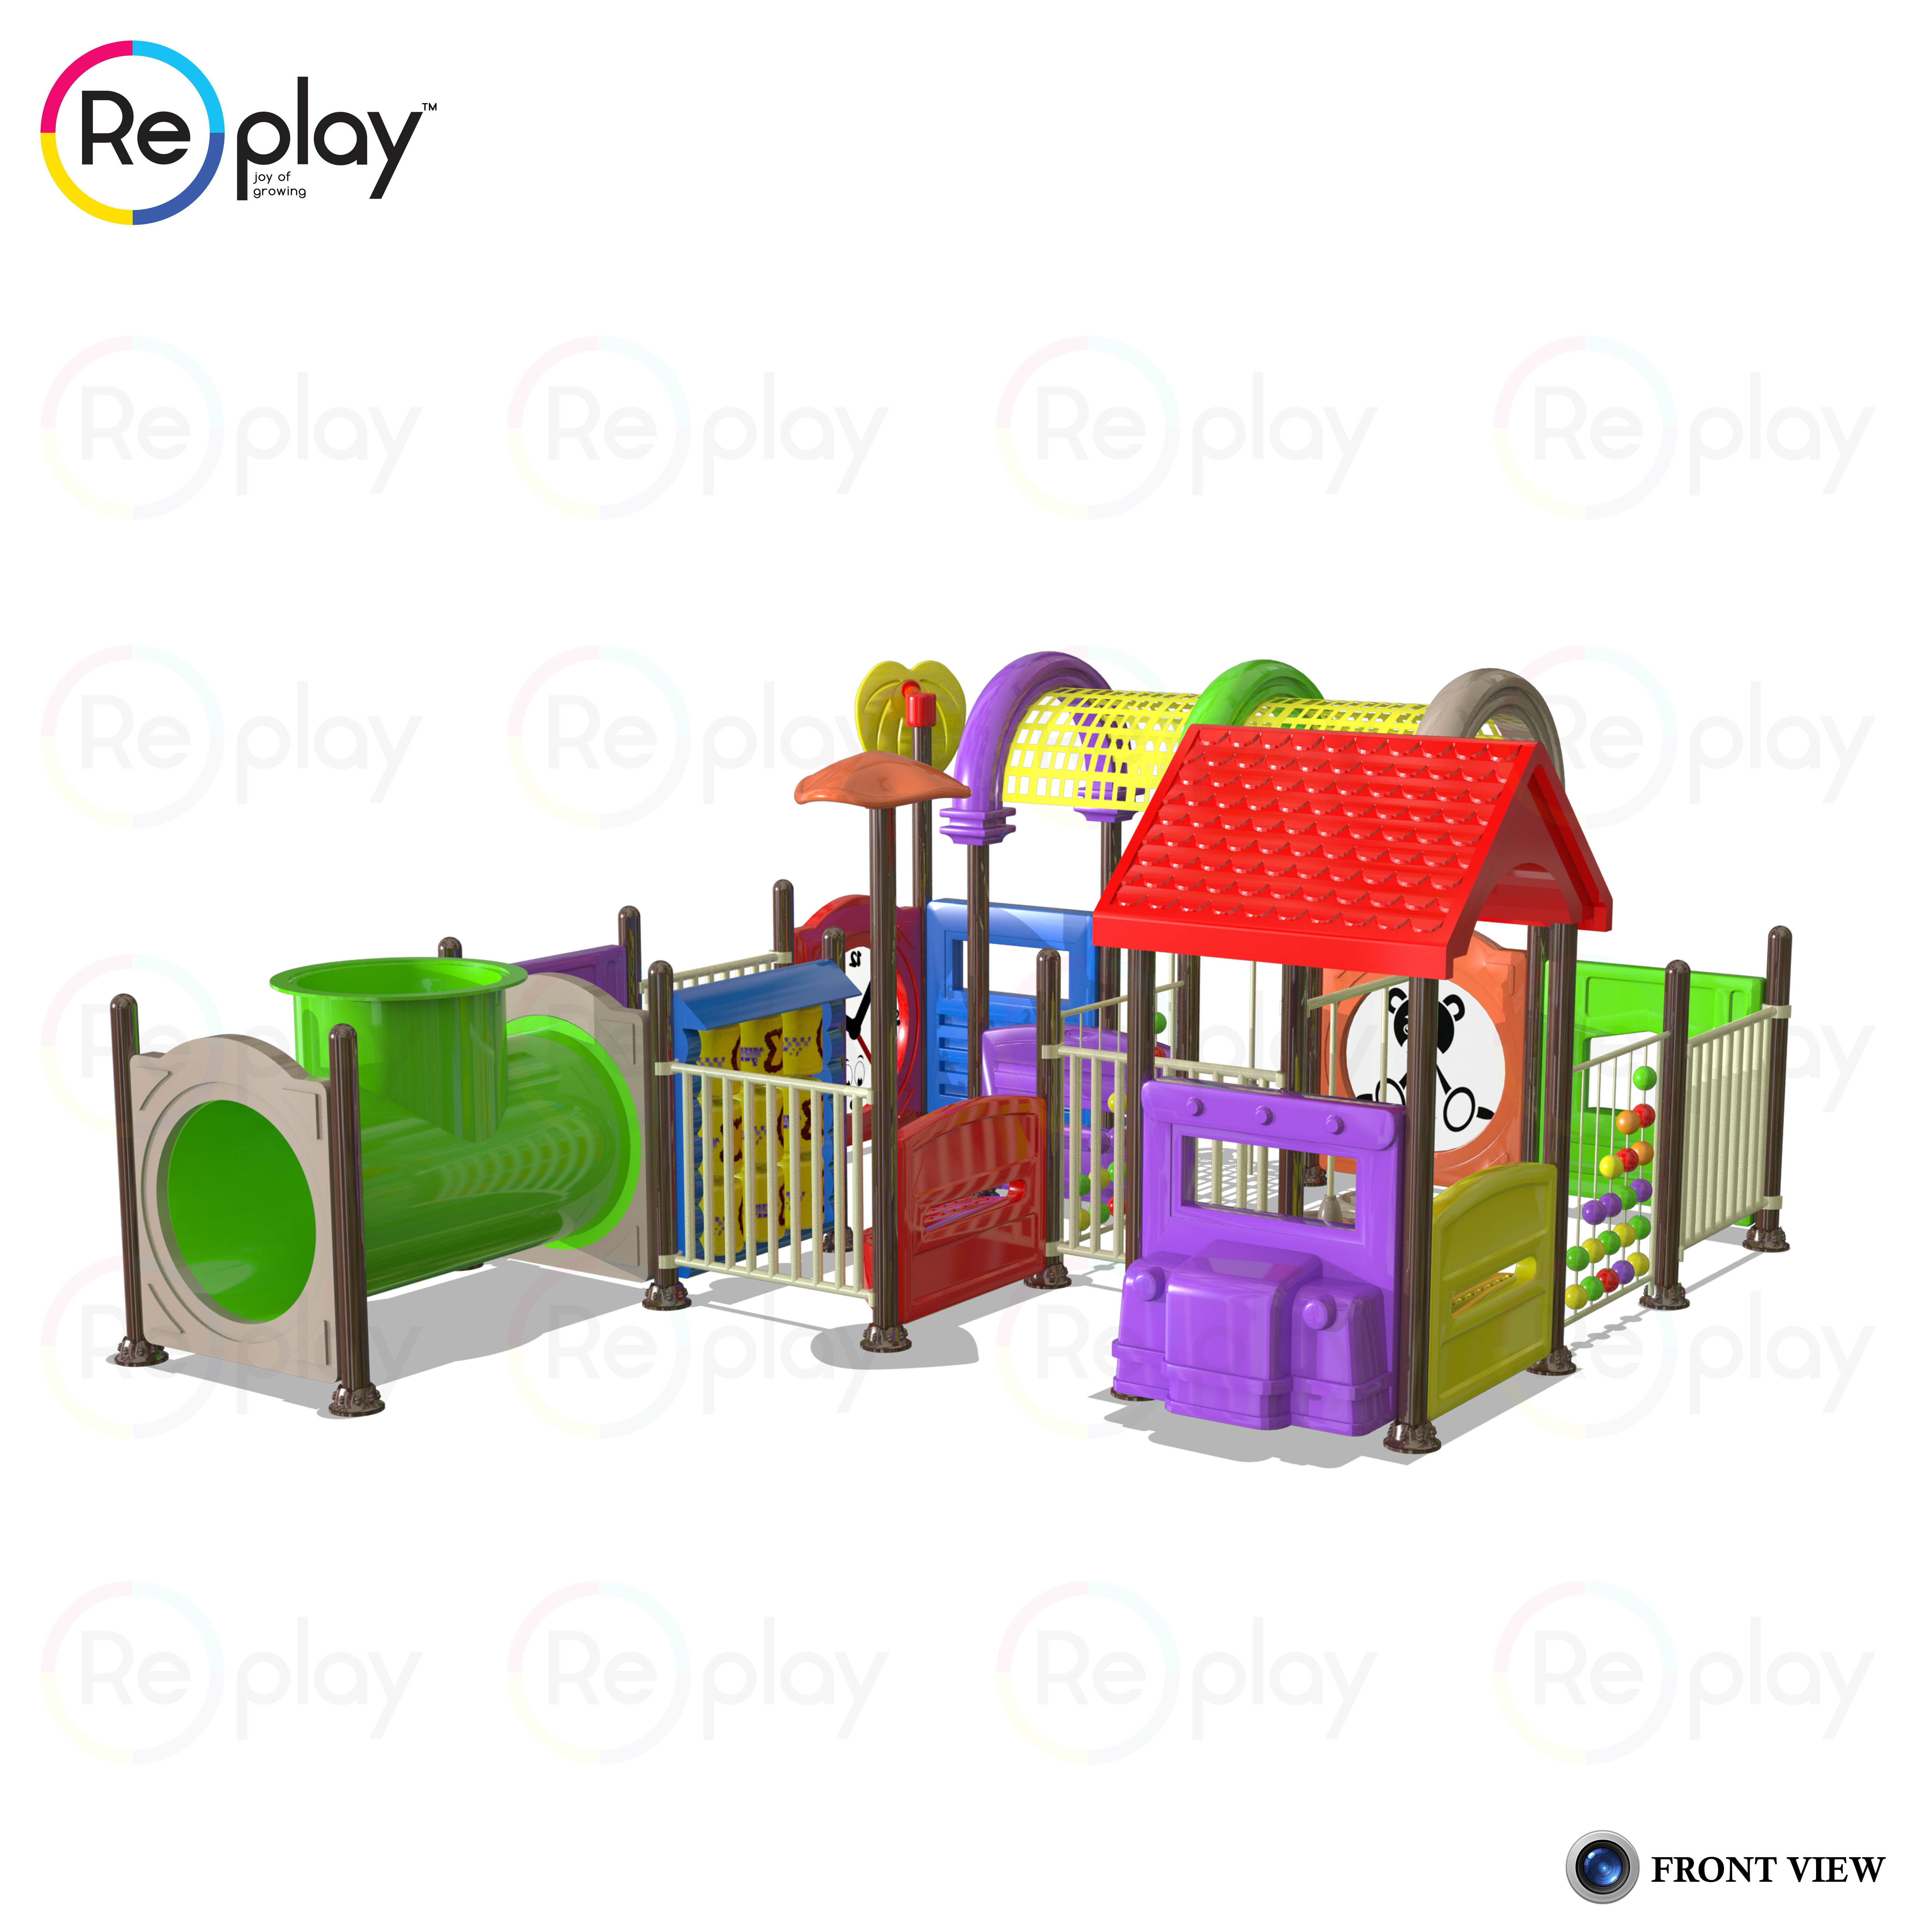 Replay Specially-abled Playground Equipment